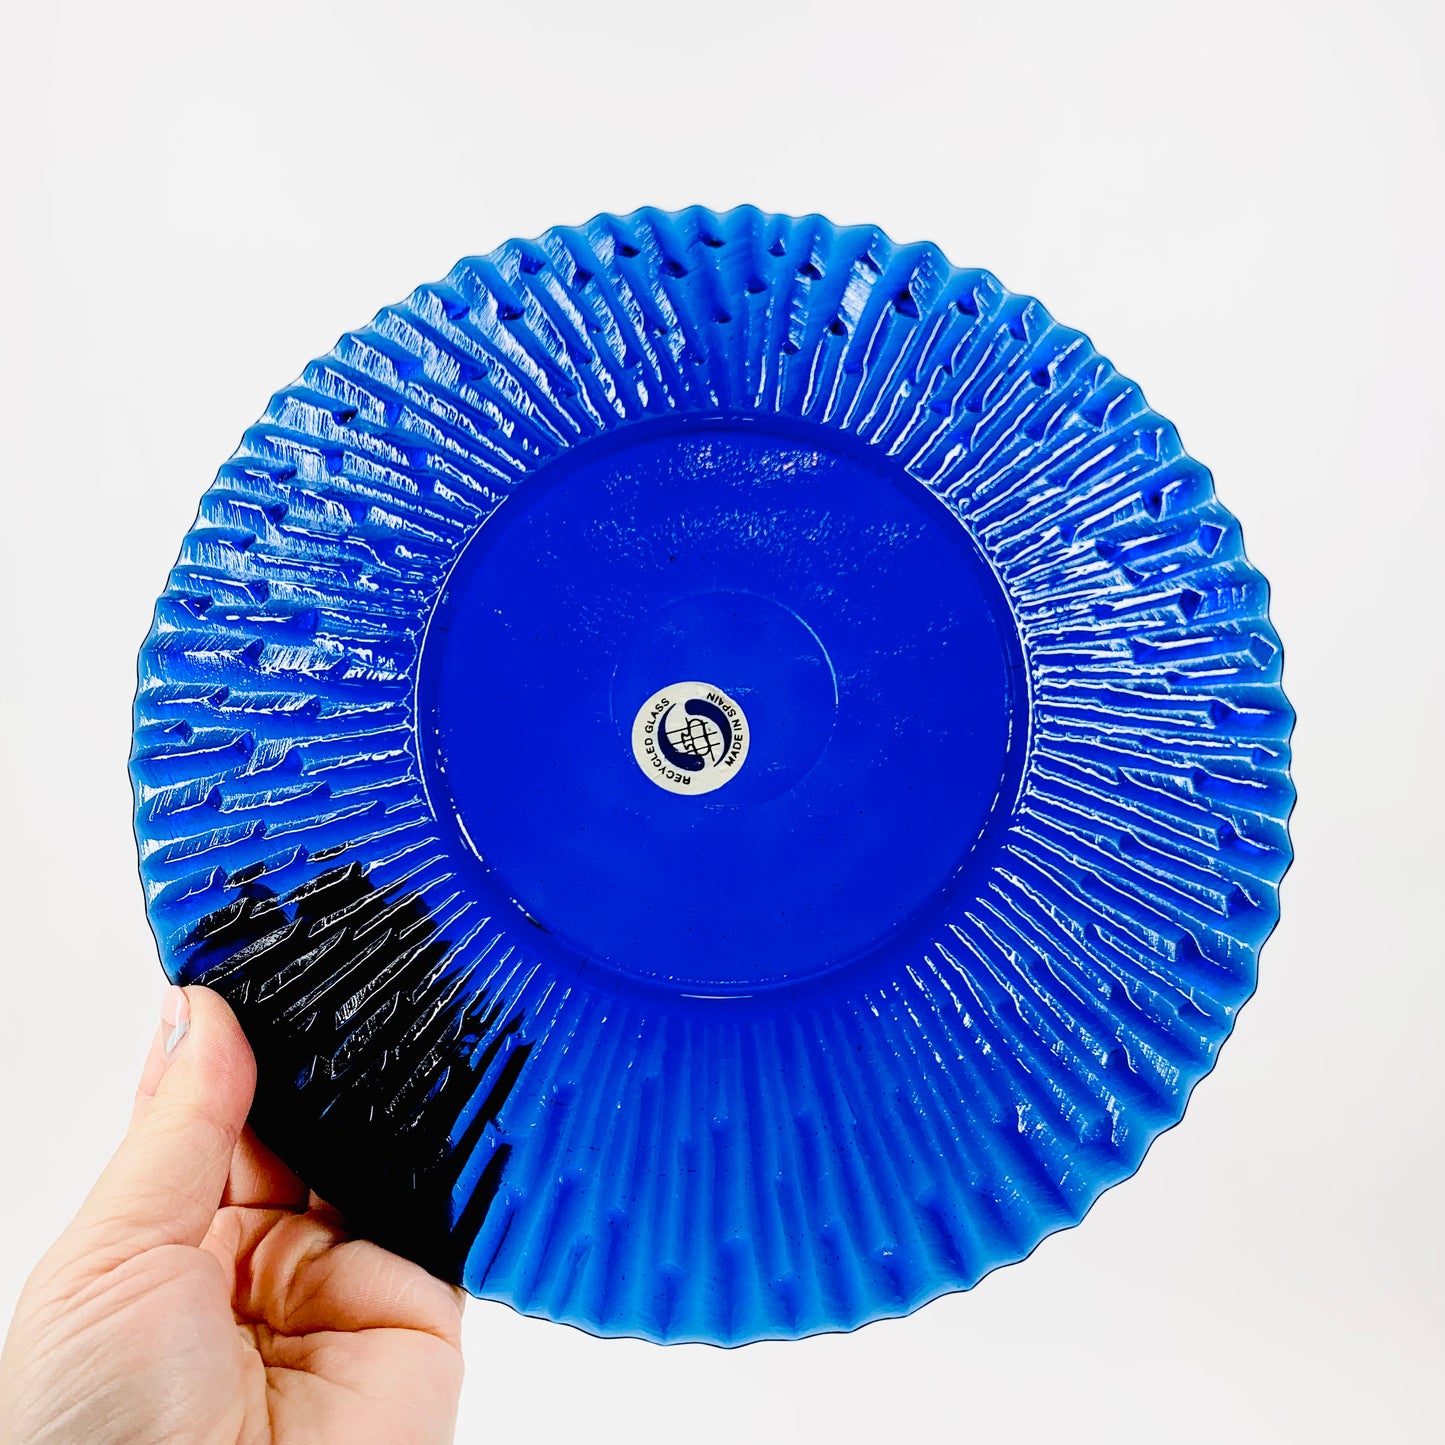 Vintage Spanish recycled pressed blue glass plate